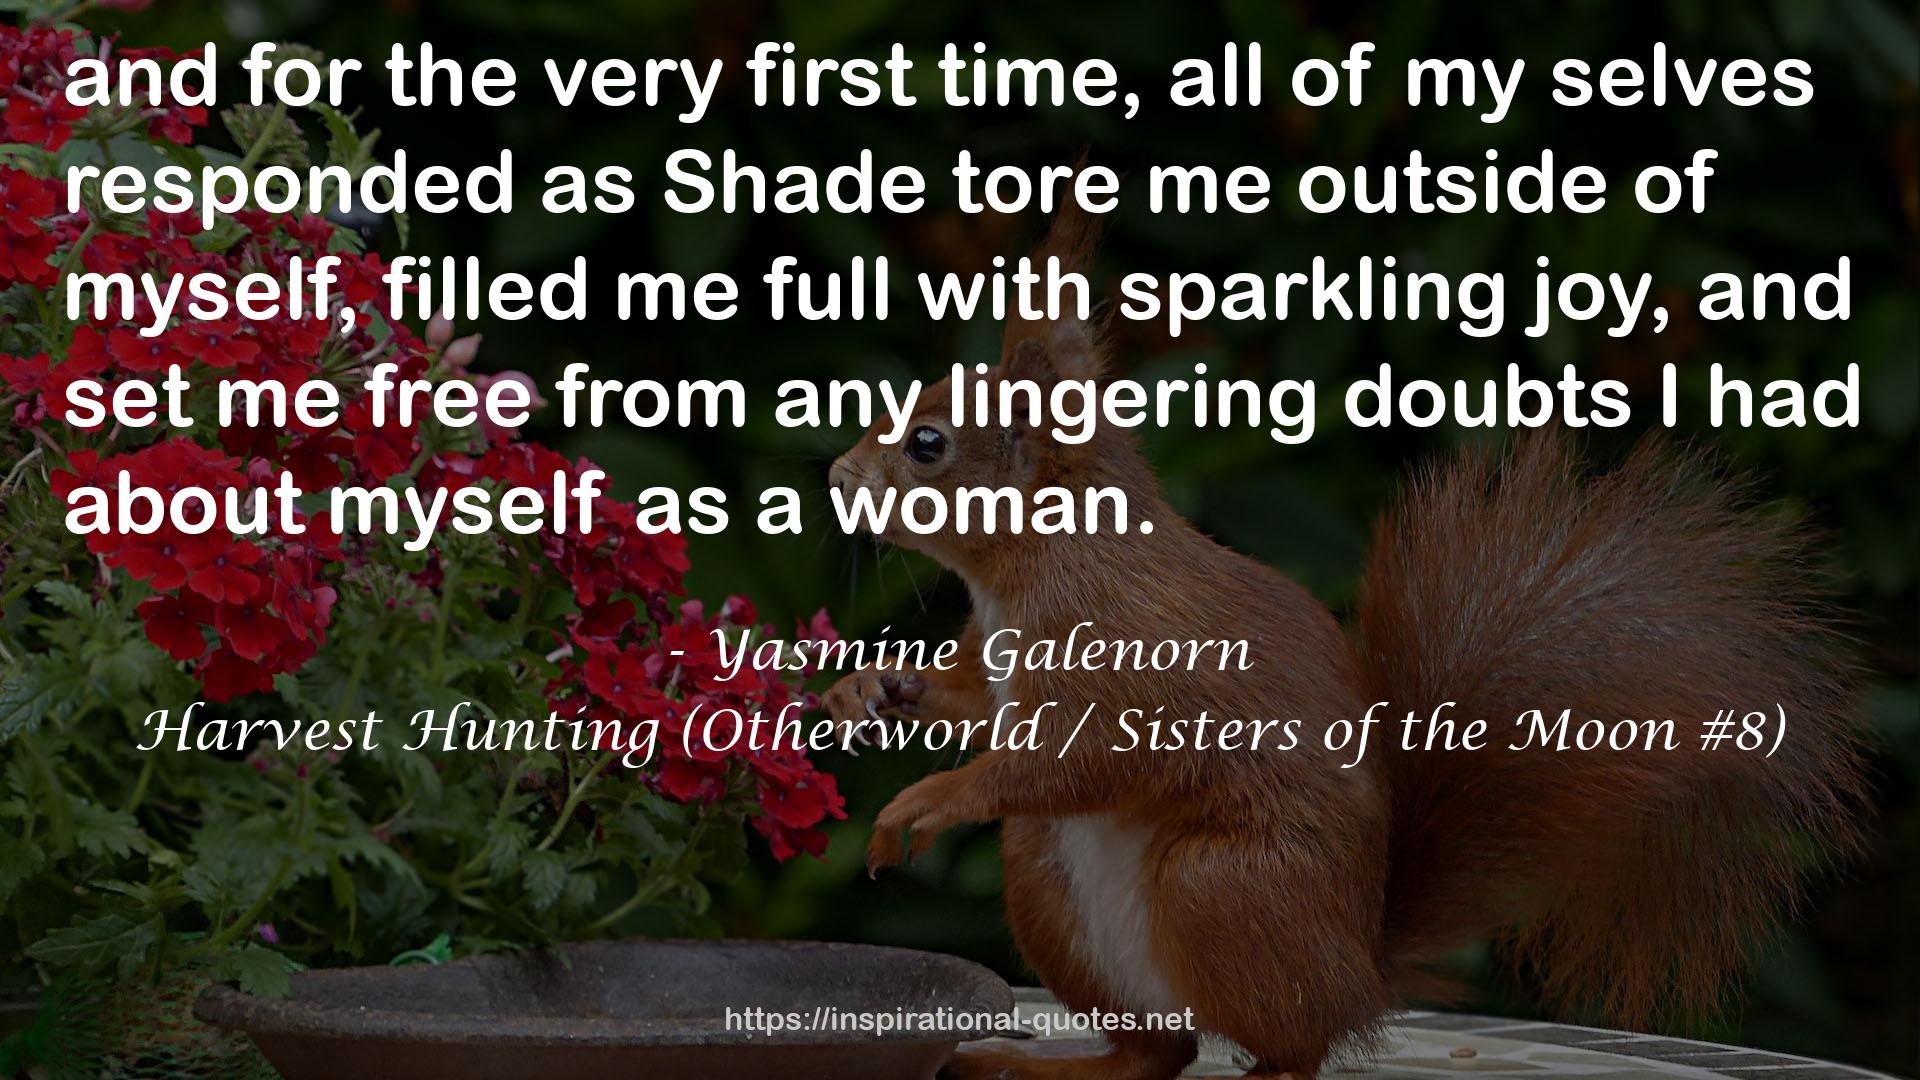 Harvest Hunting (Otherworld / Sisters of the Moon #8) QUOTES